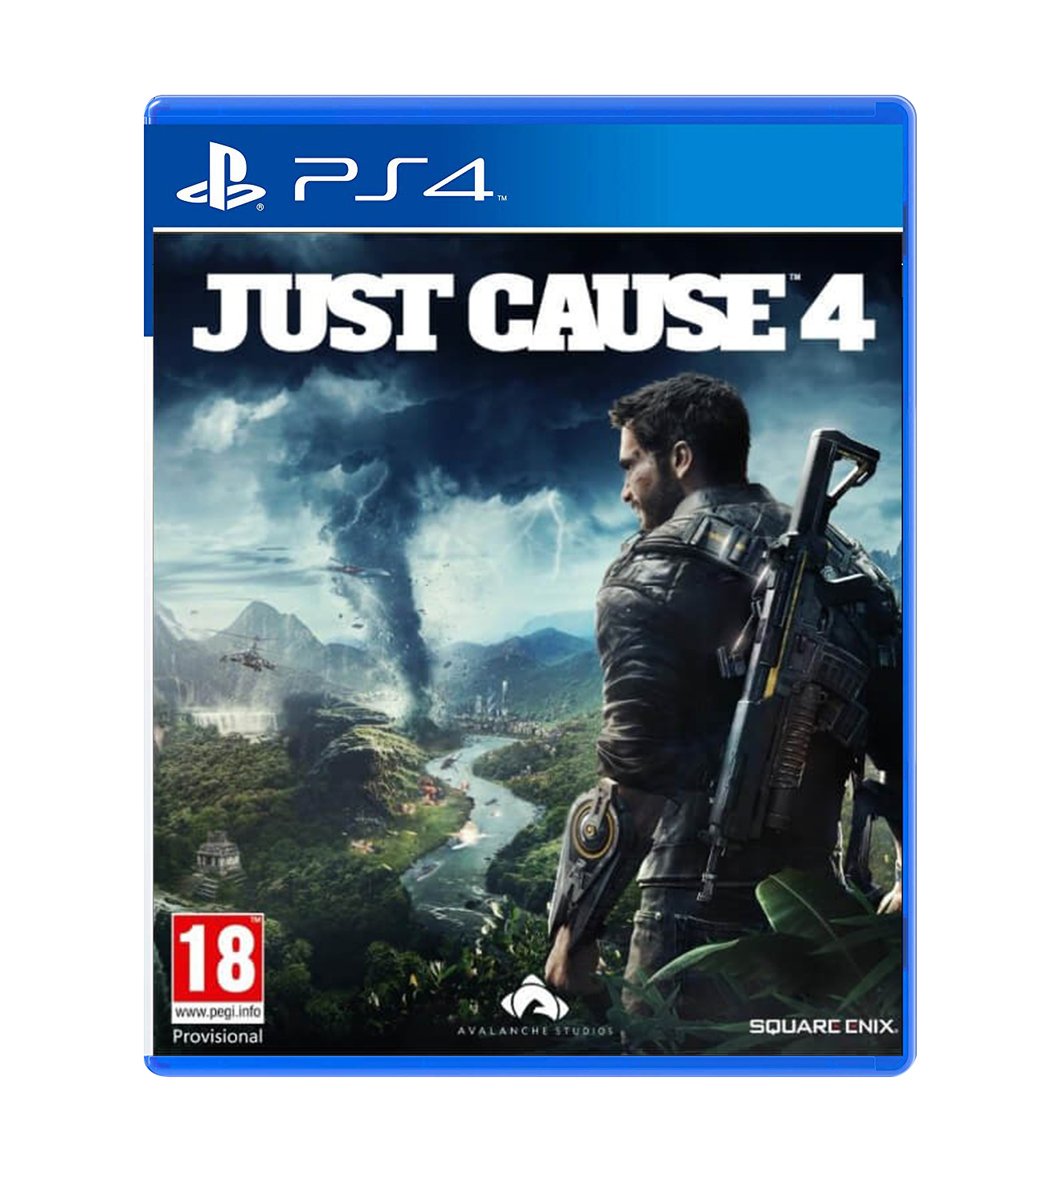 PS4 Just Cause 4 Day 1 Edition SteelBook with DLC